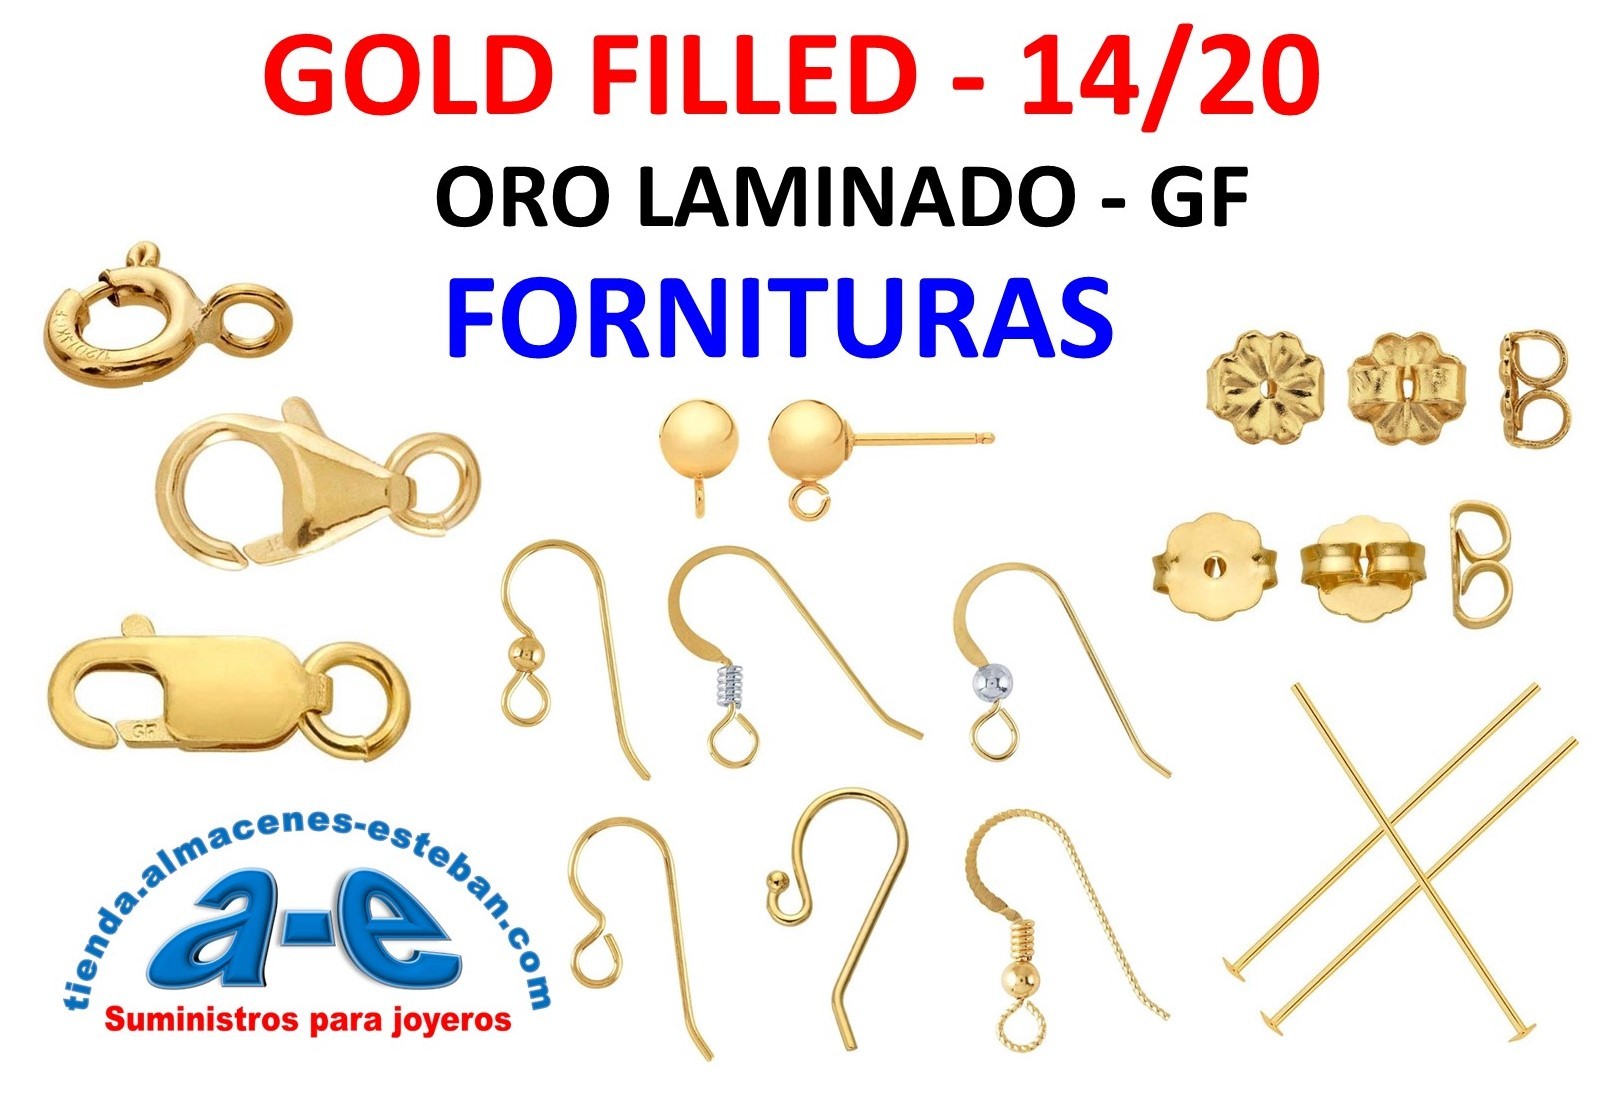 GOLD-FILLED-FORNITURAS